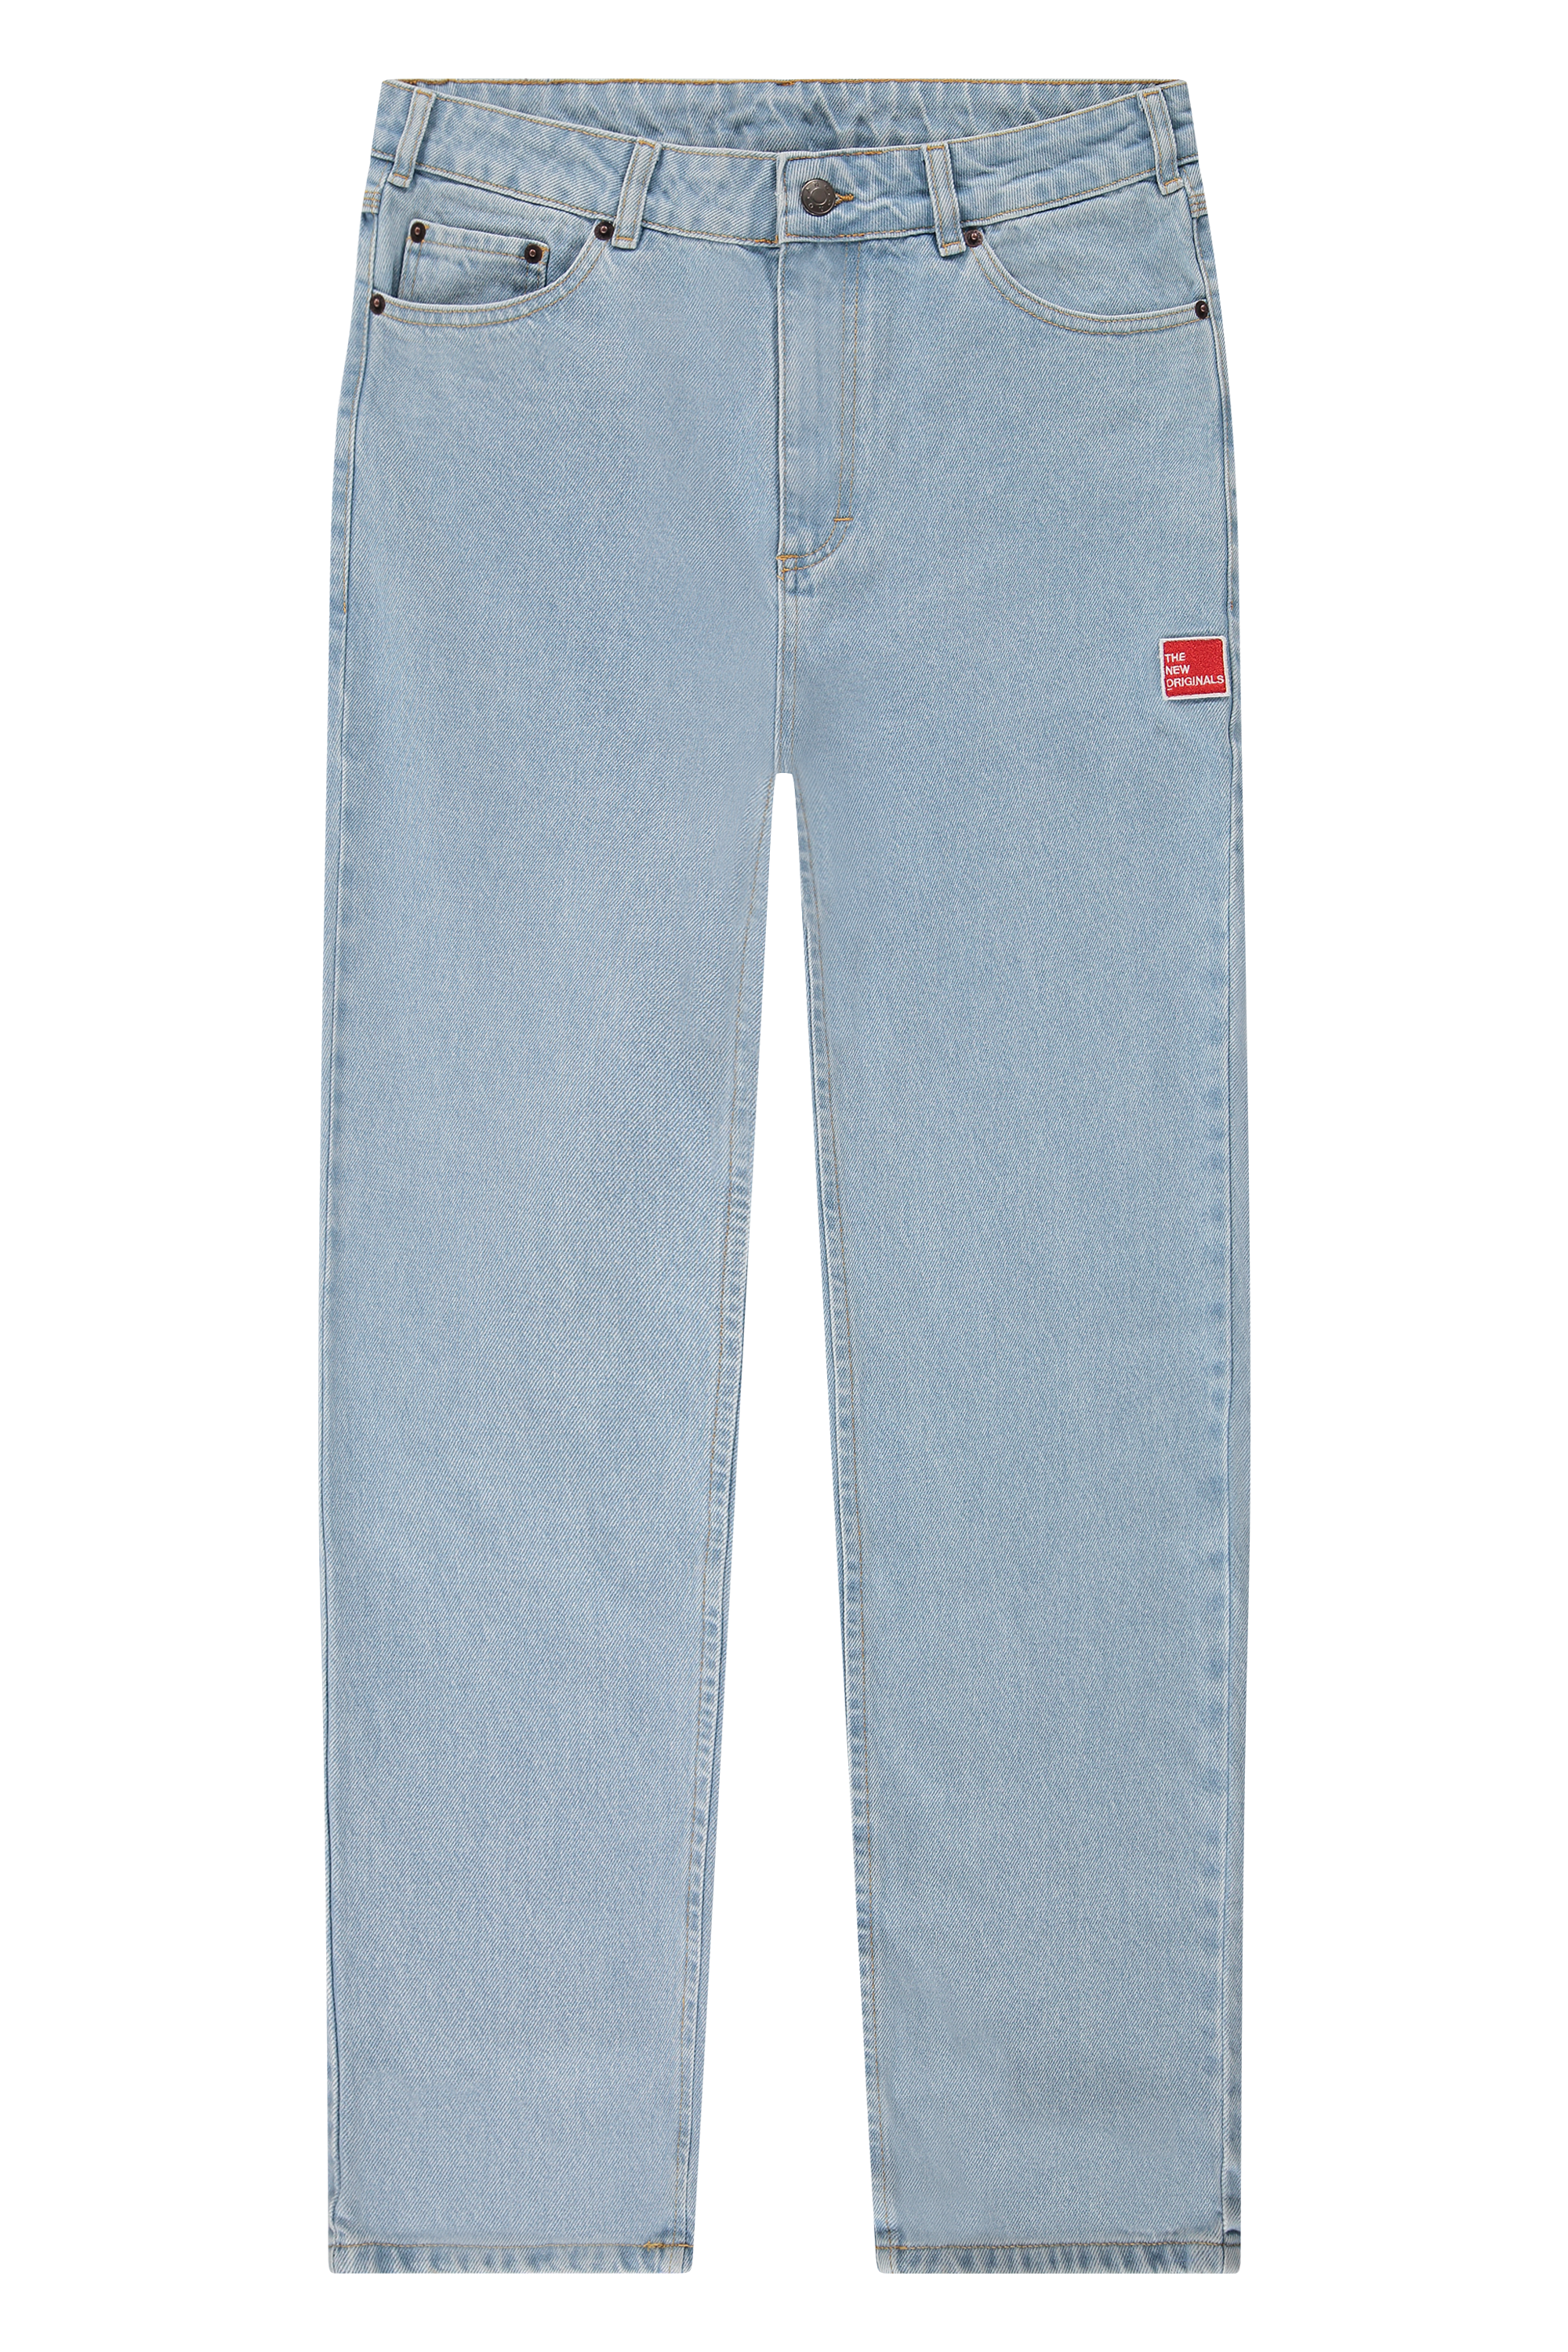 Slim jeans 7 For All Mankind Blue size 26 US in Cotton - elasthane -  37442638